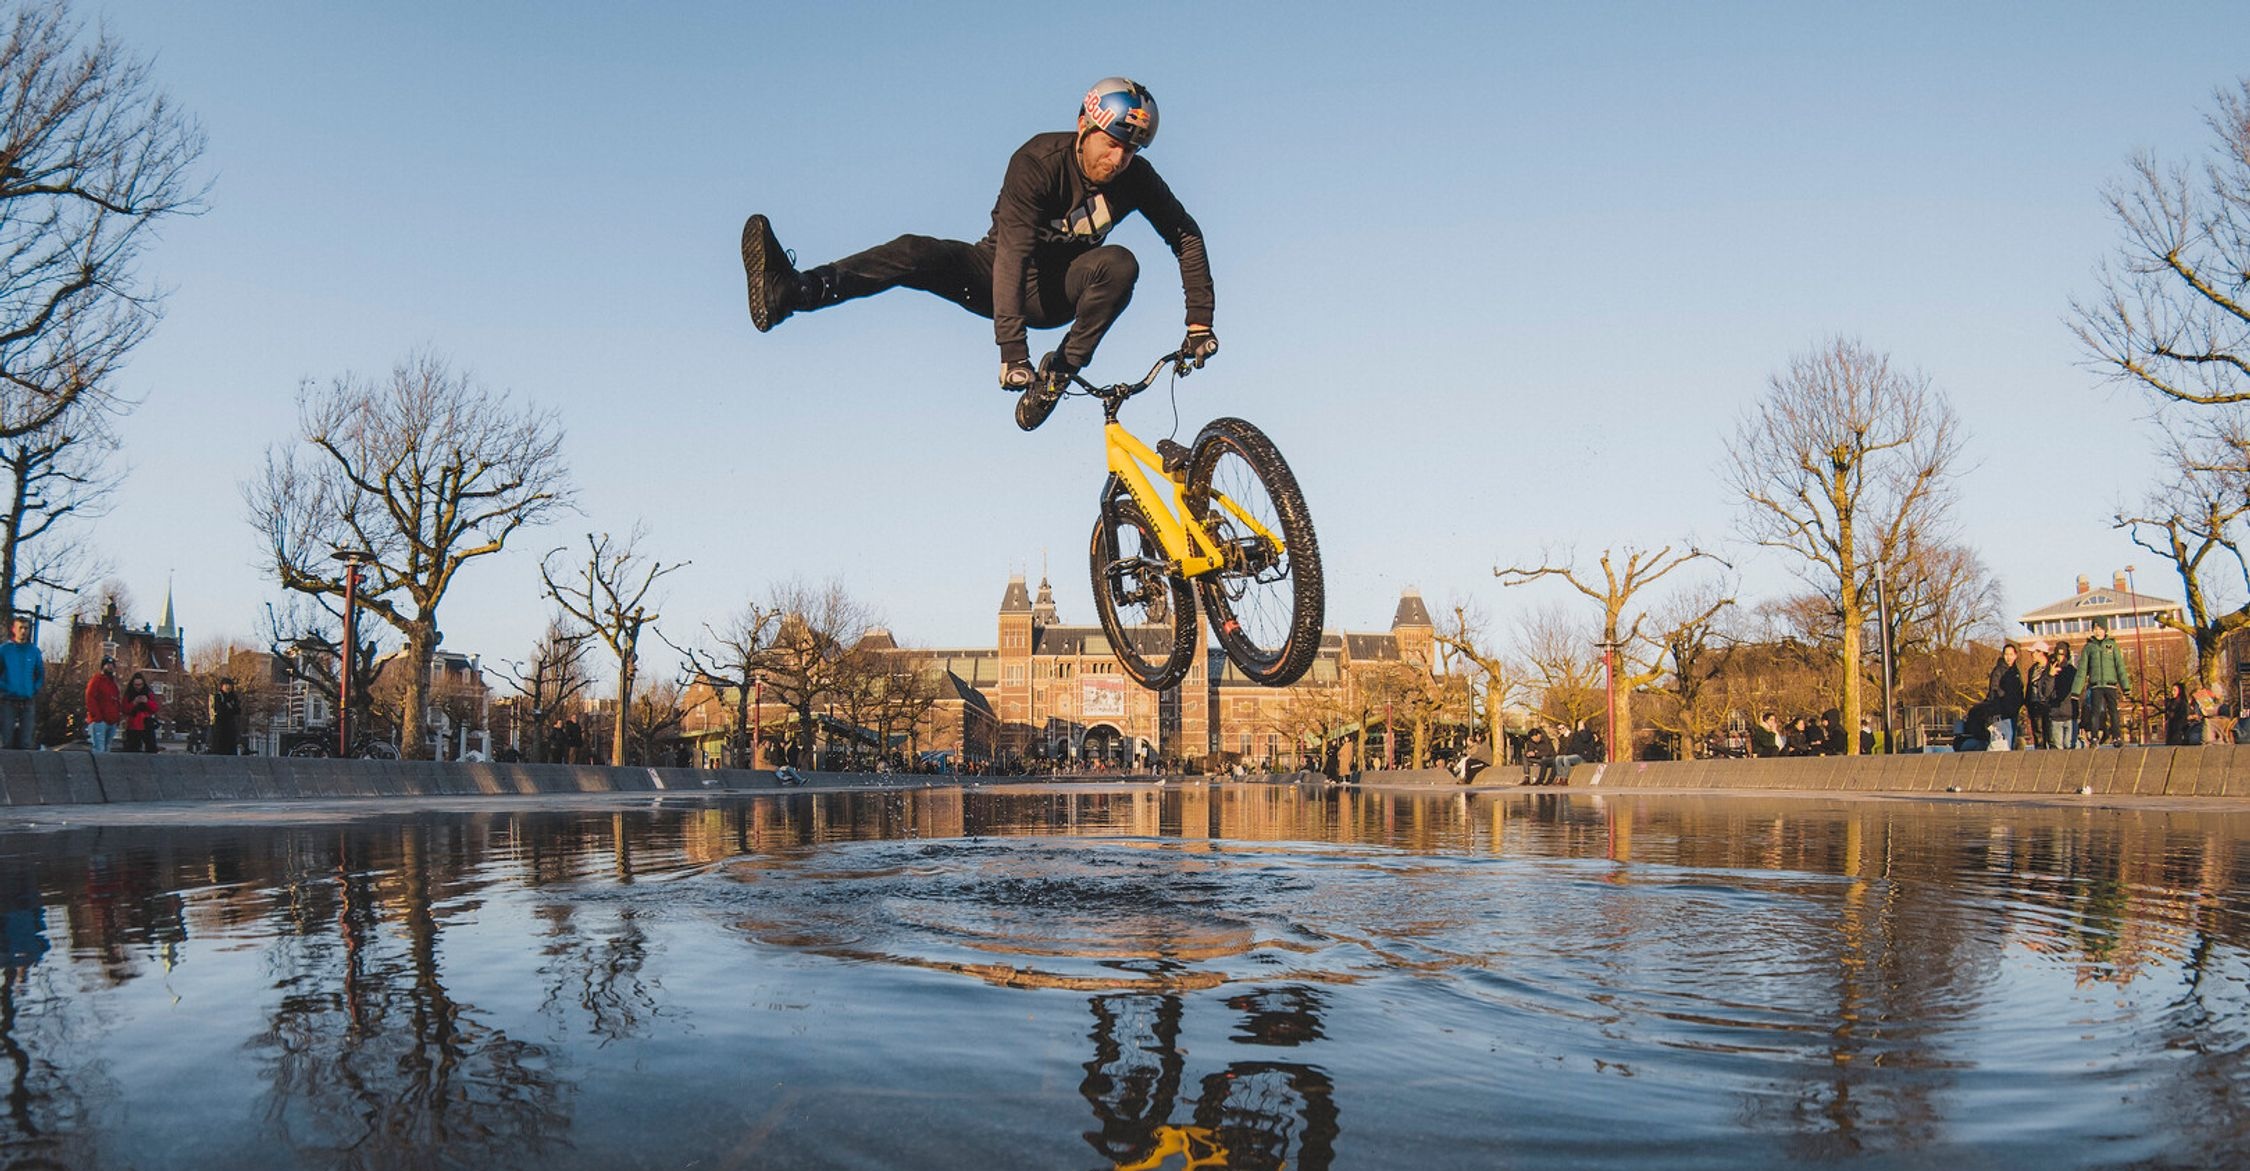 A BMX rider is captured mid-air performing a stunt, with their body horizontal to the ground and legs kicked out to the side, above a yellow bicycle. The bike's reflection is visible on the wet surface below. The shot is set against an urban park backdrop with historical buildings, bare trees, and a clear blue sky. Onlookers are seen in the distance. The low angle of the photograph emphasizes the height of the jump and the skill of the rider.